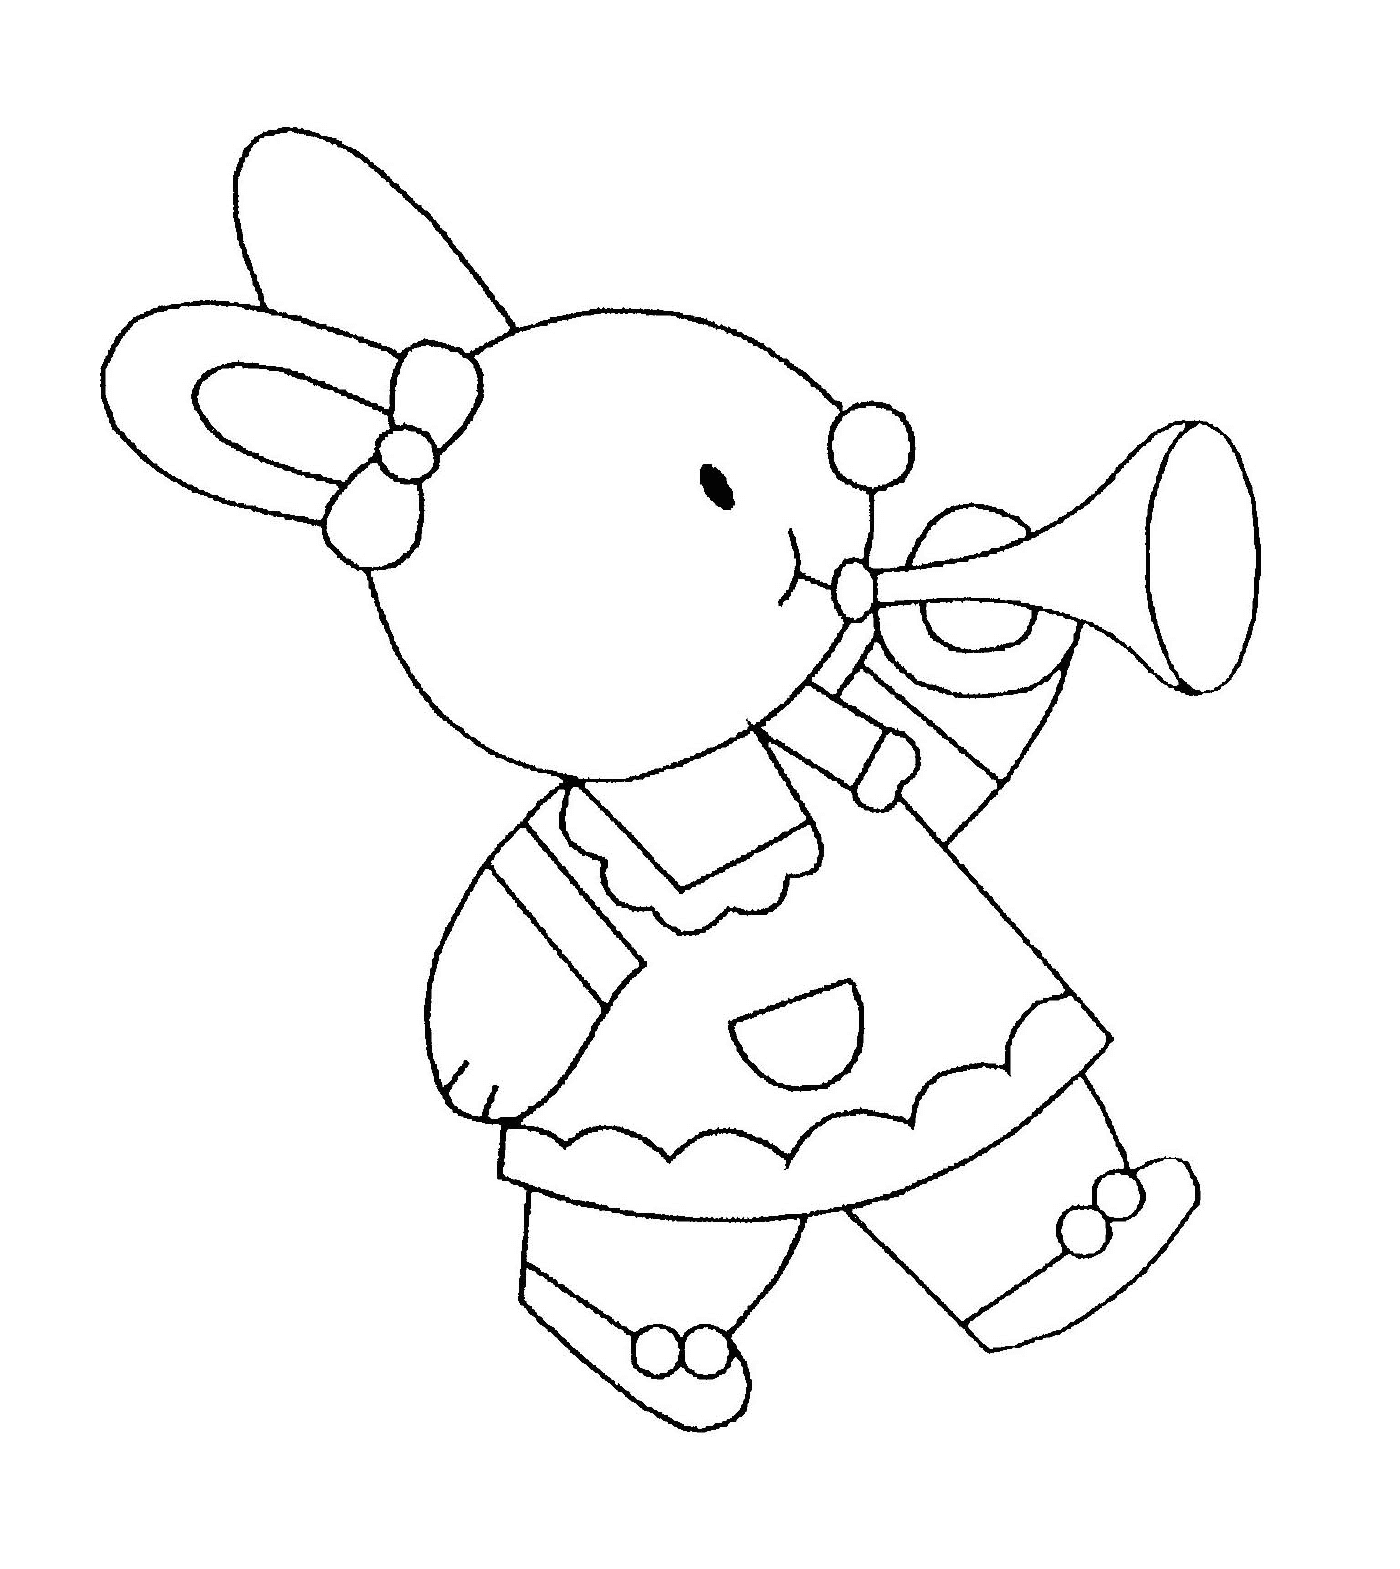  Musician rabbit with trumpet 